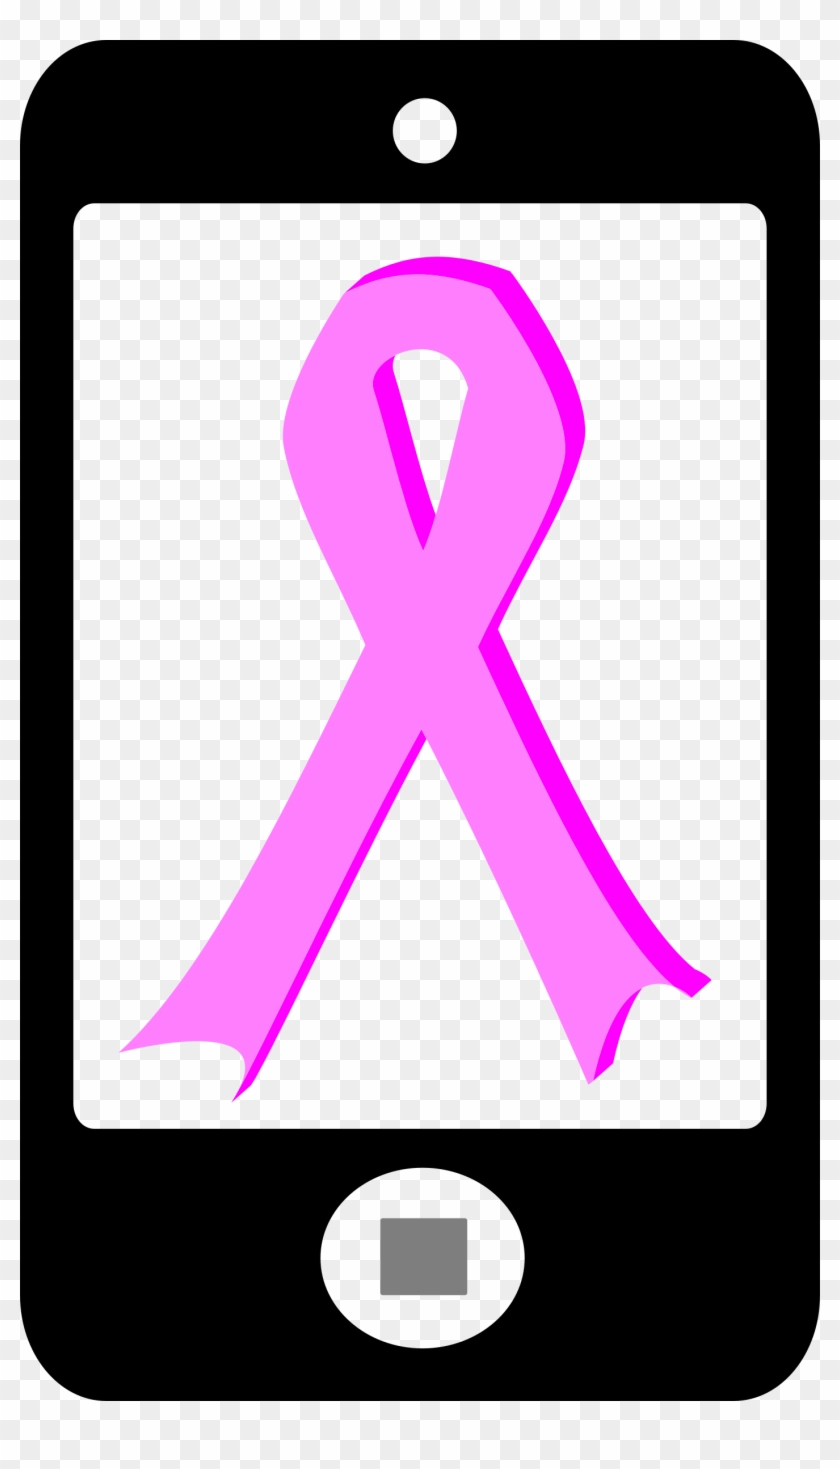 This Free Icons Png Design Of Phone With Pink Ribbon Clipart #460514